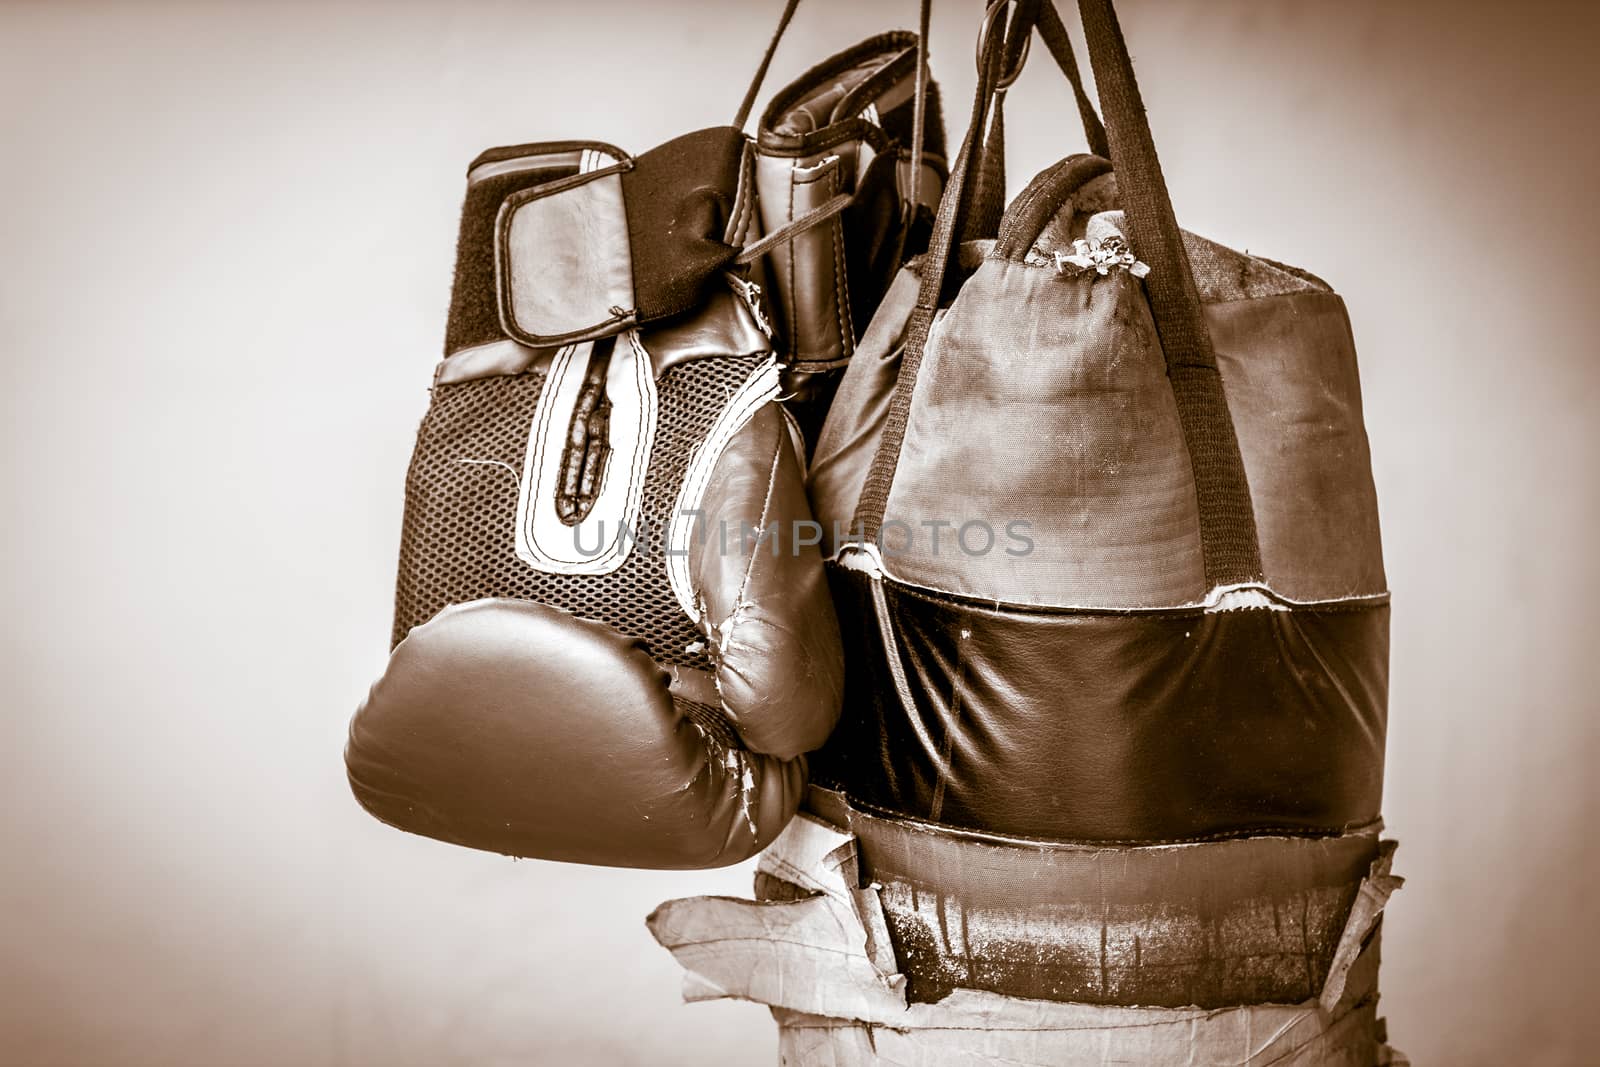 Photograph of an old punching bag and a pair of boxing gloves